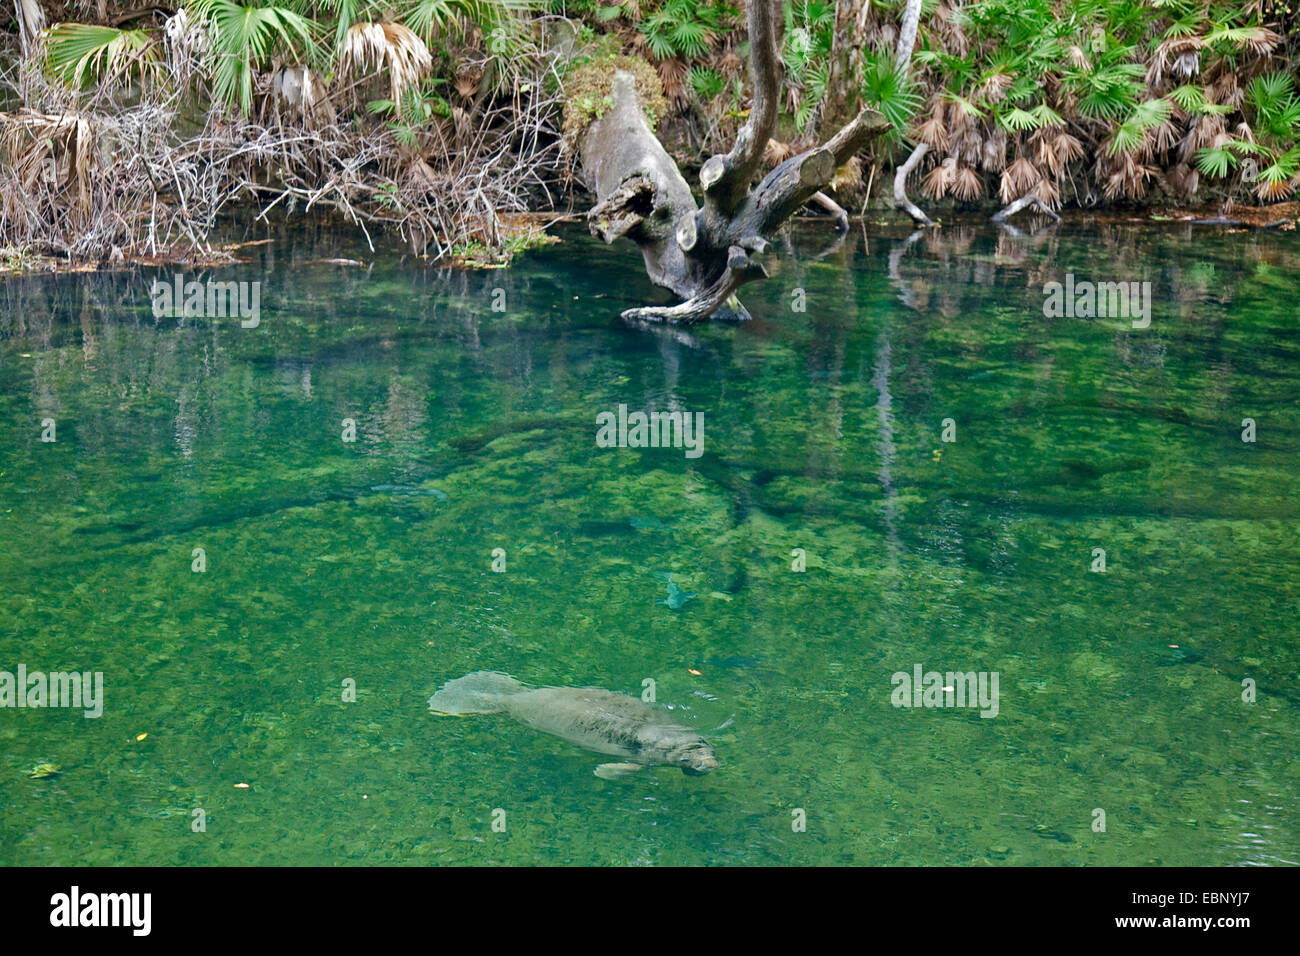 West Indian manatee, Florida manatee, Caribbean manatee, Antillean manatee (Trichechus manatus latirostris), manatee swimming in a running water, USA, Florida, Blue Spring State Park Stock Photo